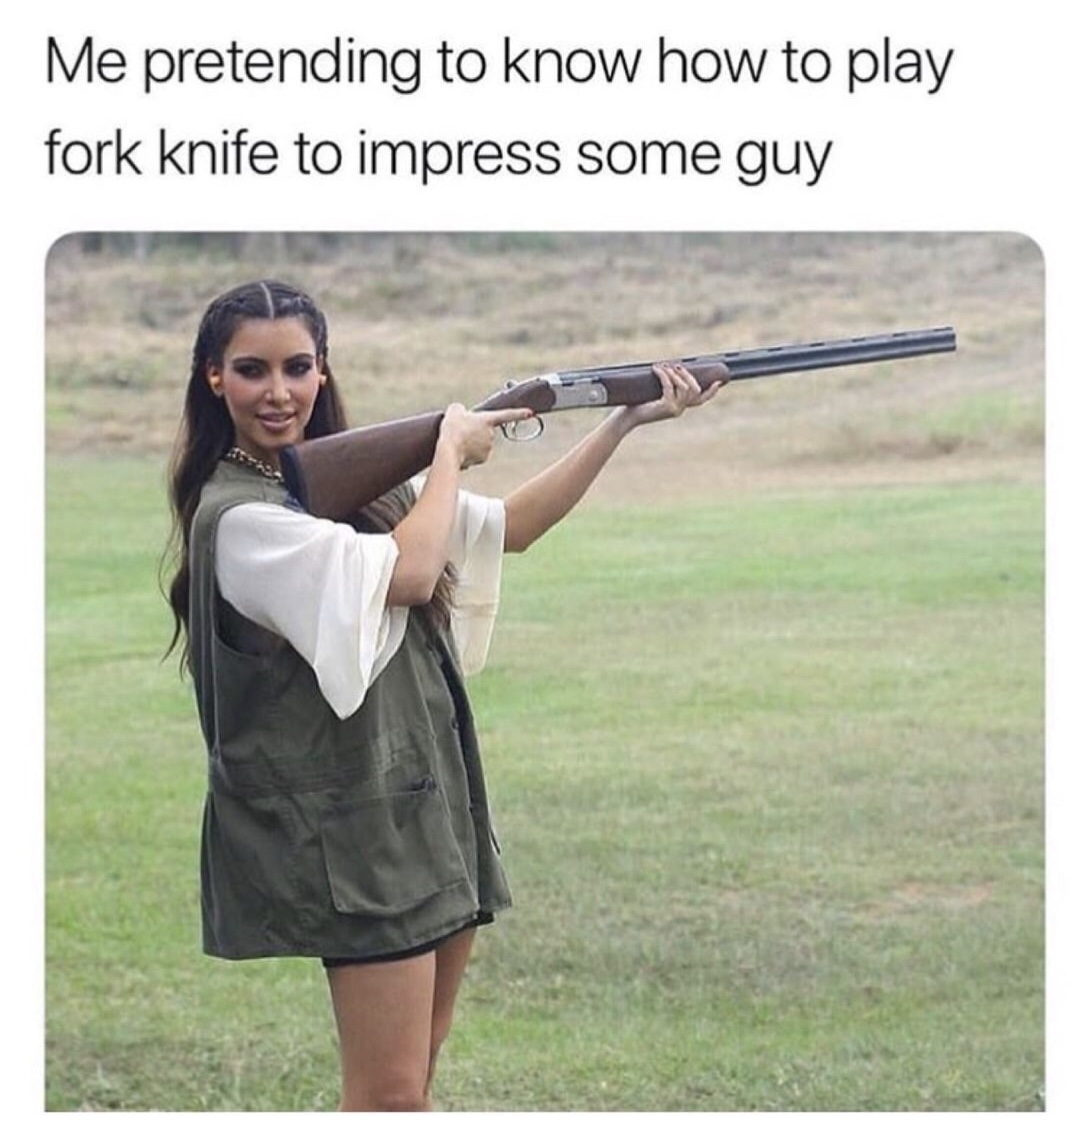 Kim Kardashian shooting a shotgun with the text 'me pretending to know how to play fork knife to impress some guy' r4p9k7ve